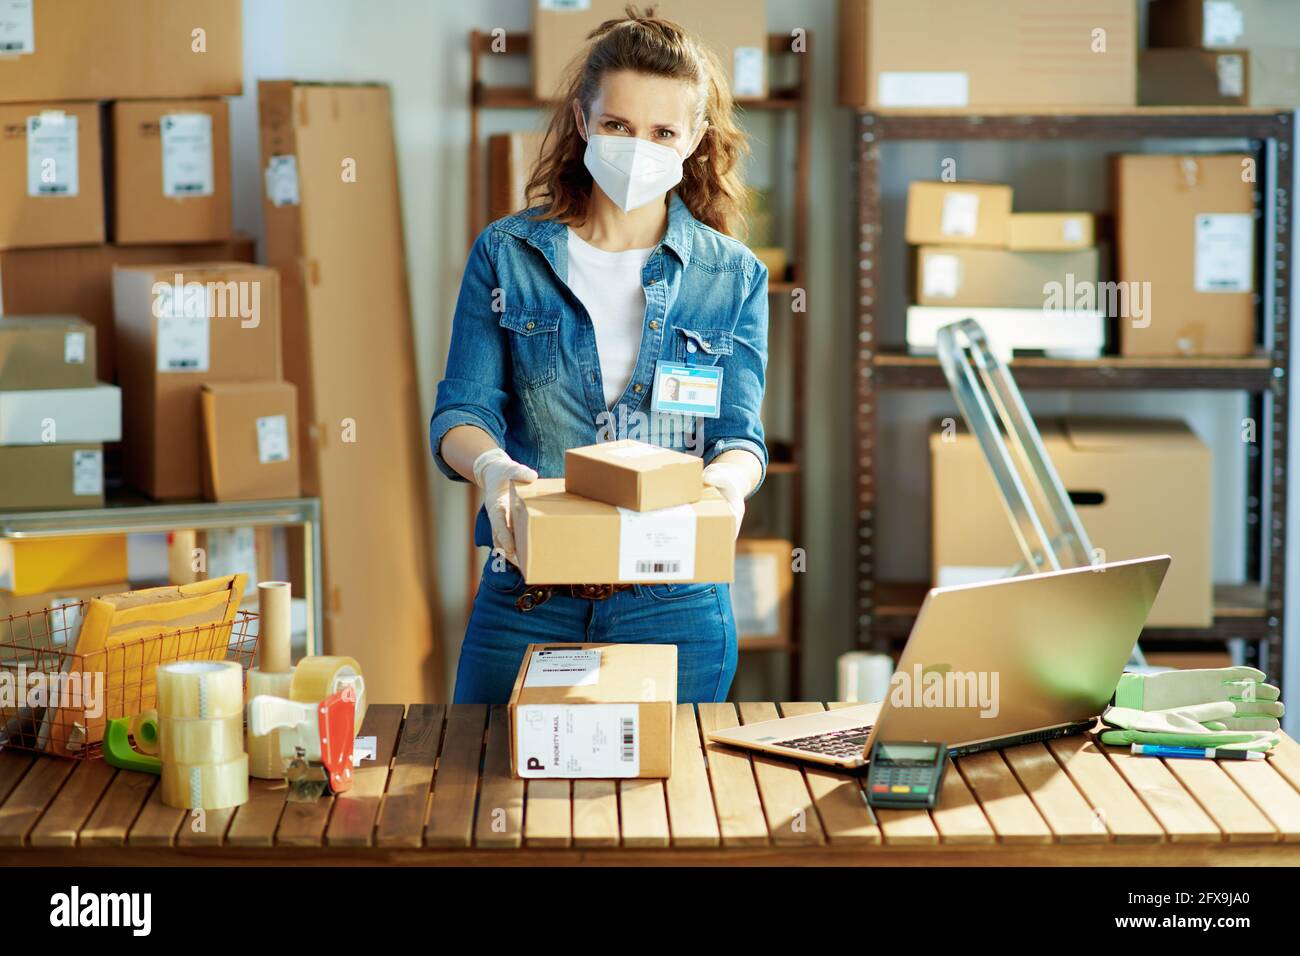 Delivery business. Portrait of modern female in jeans with laptop and ffp2 mask giving parcel in the office. Stock Photo